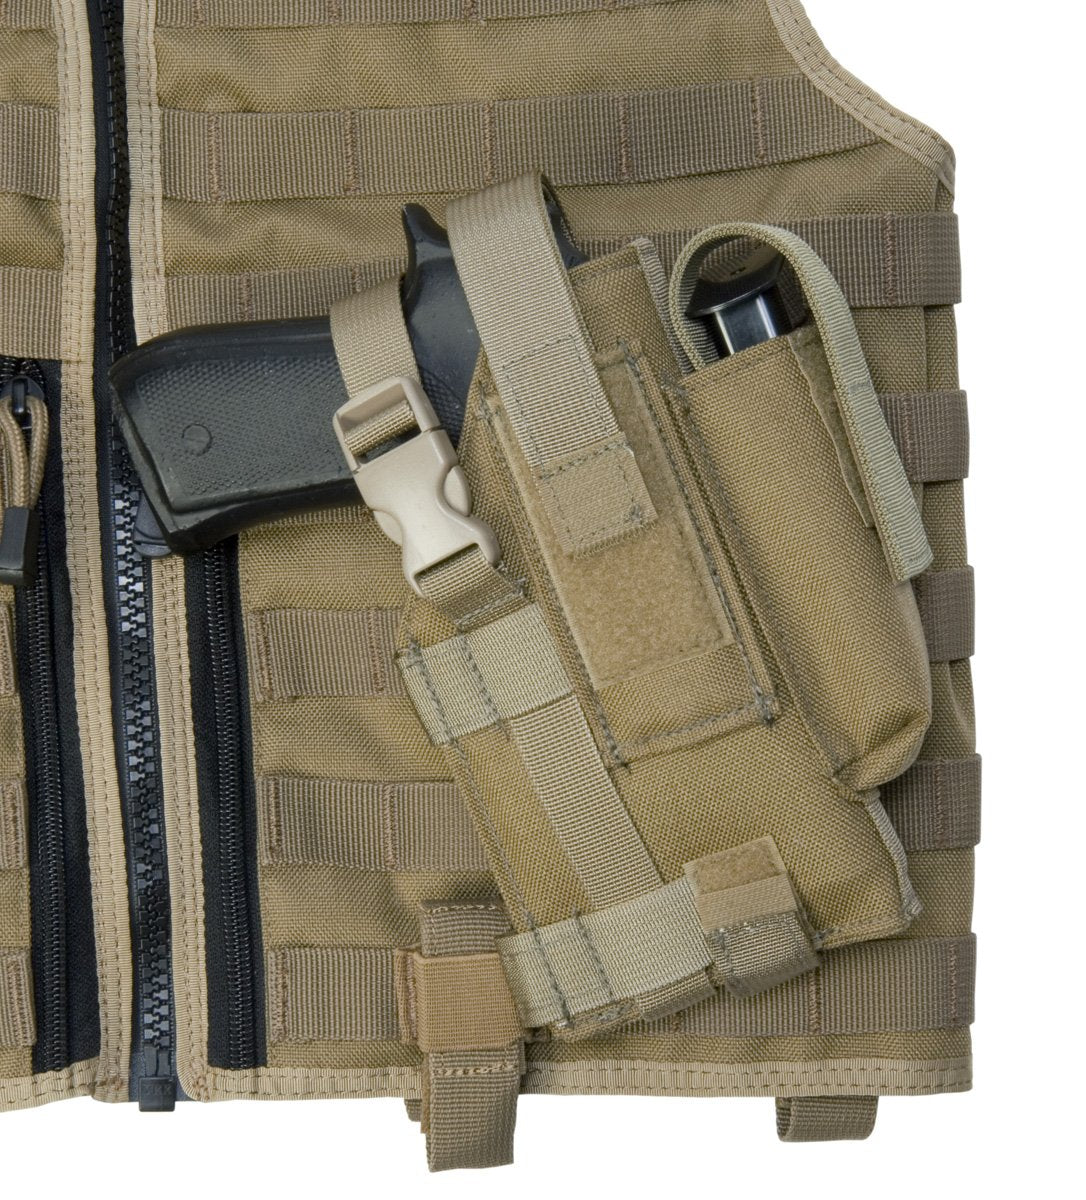 Navy Seal ABA Tactical vest replica package 2021 by TGC